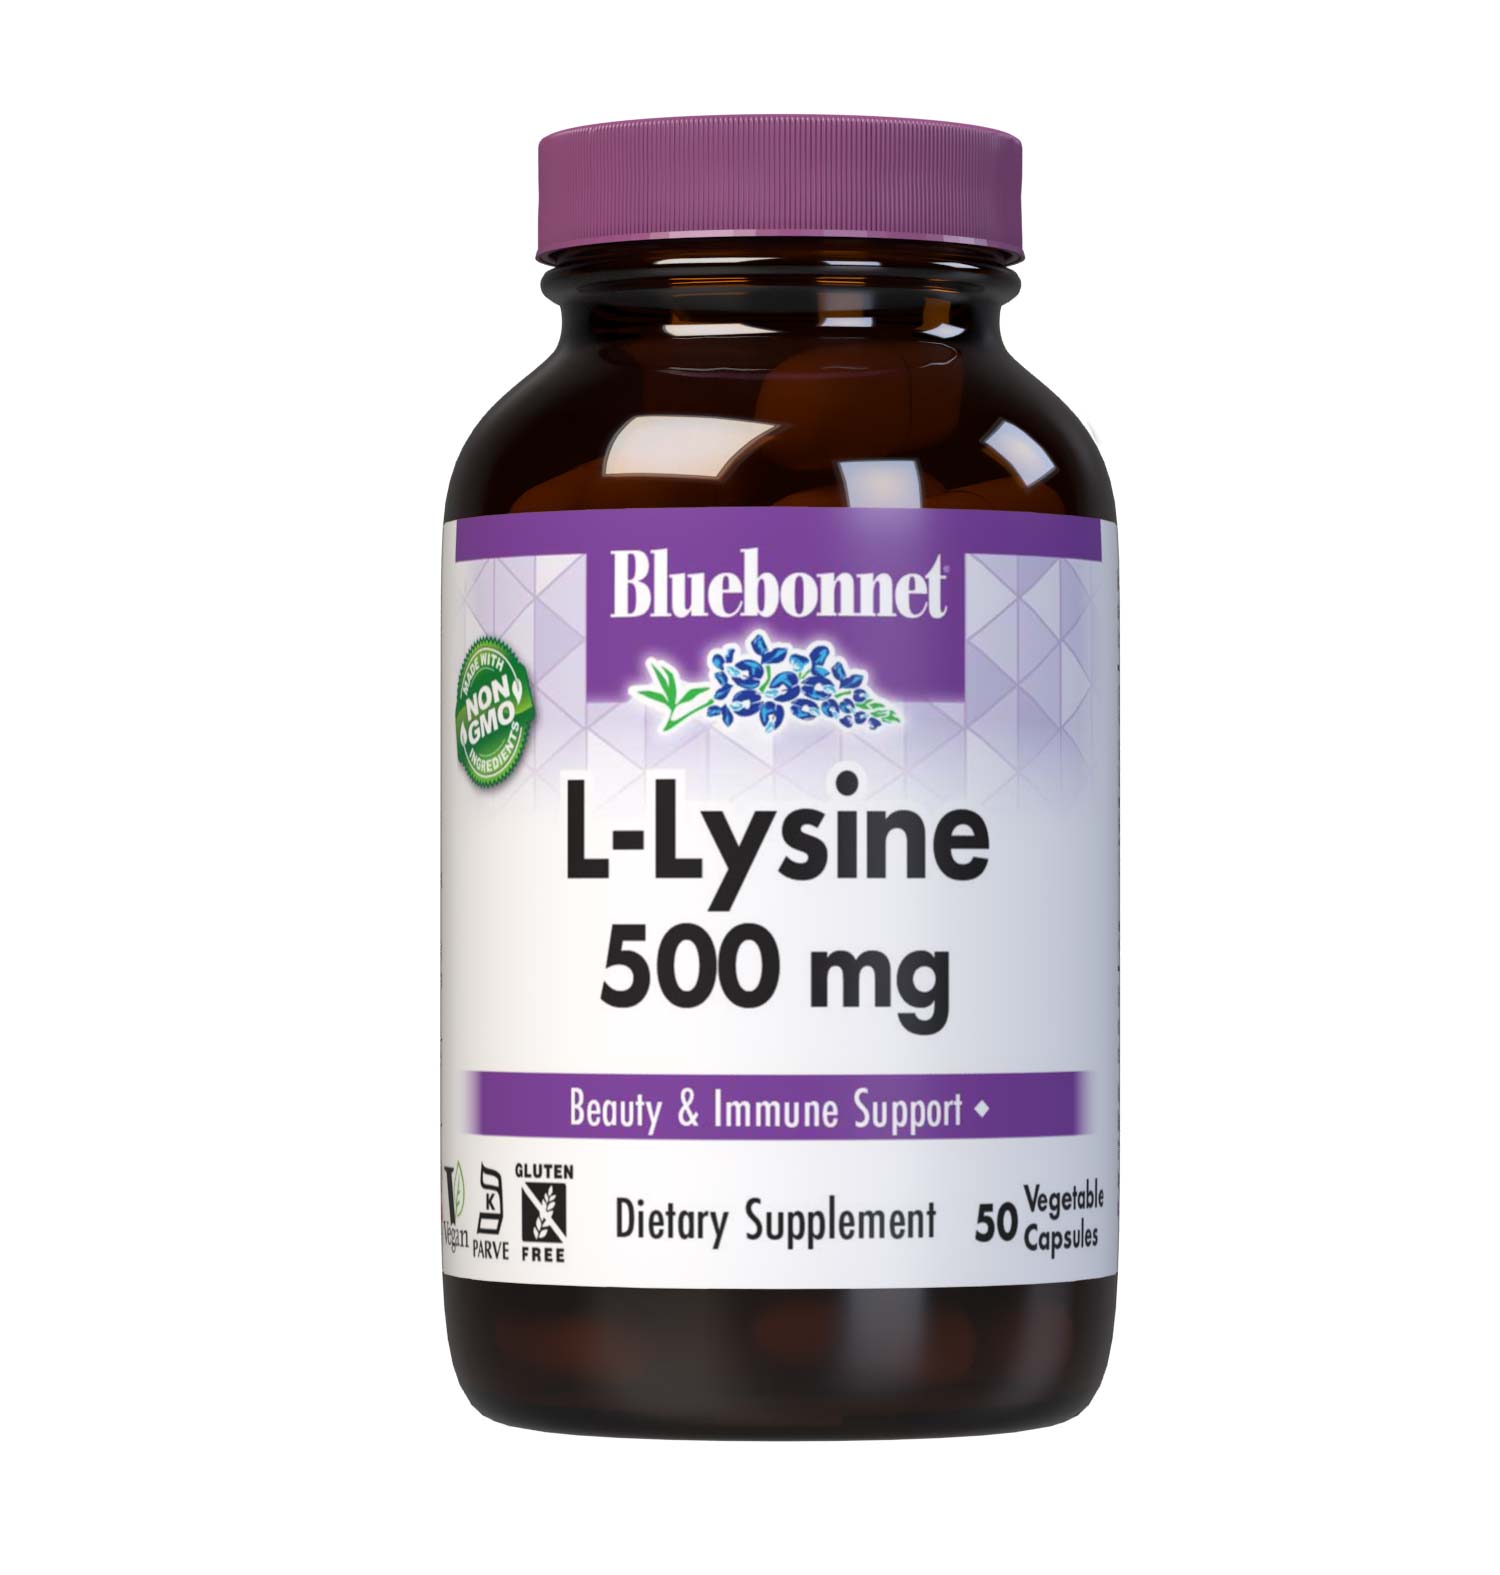 Bluebonnet’s L-Lysine 500 mg 50 vegetable capsules are formulated with the free-form amino acid L-lysine HCI in its crystalline form from Ajinomoto to help support immune function and collagen synthesis.  #size_50 count